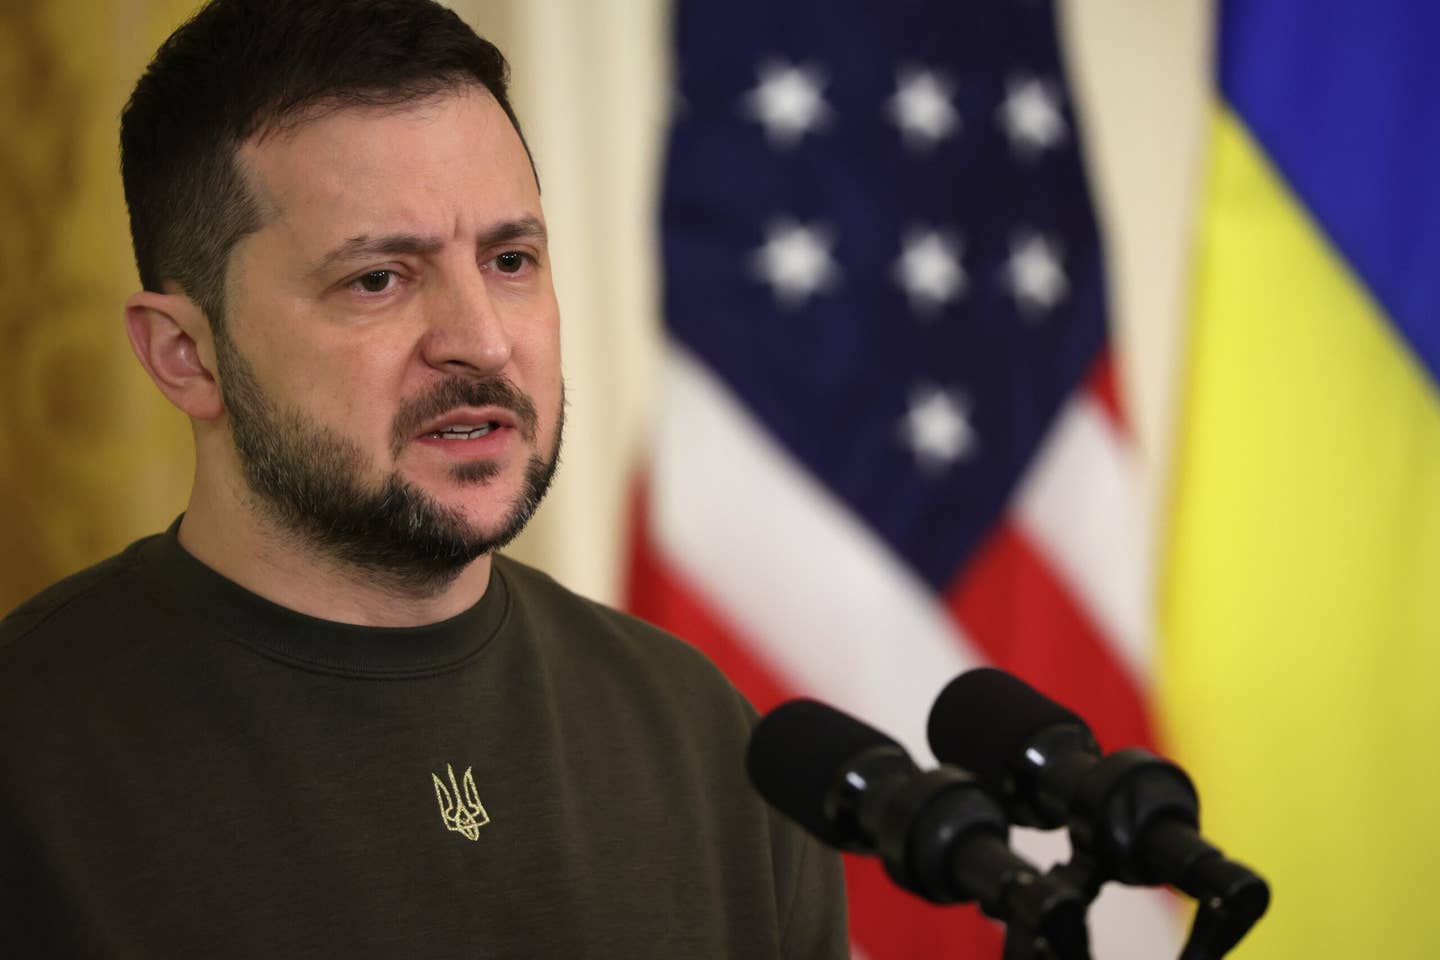 President of Ukraine Volodymyr Zelensky thanked President Joe Biden and the American people for the billions in aid his country has received, including today's announcement of a Patriot air defense battery. (Photo by Alex Wong/Getty Images)